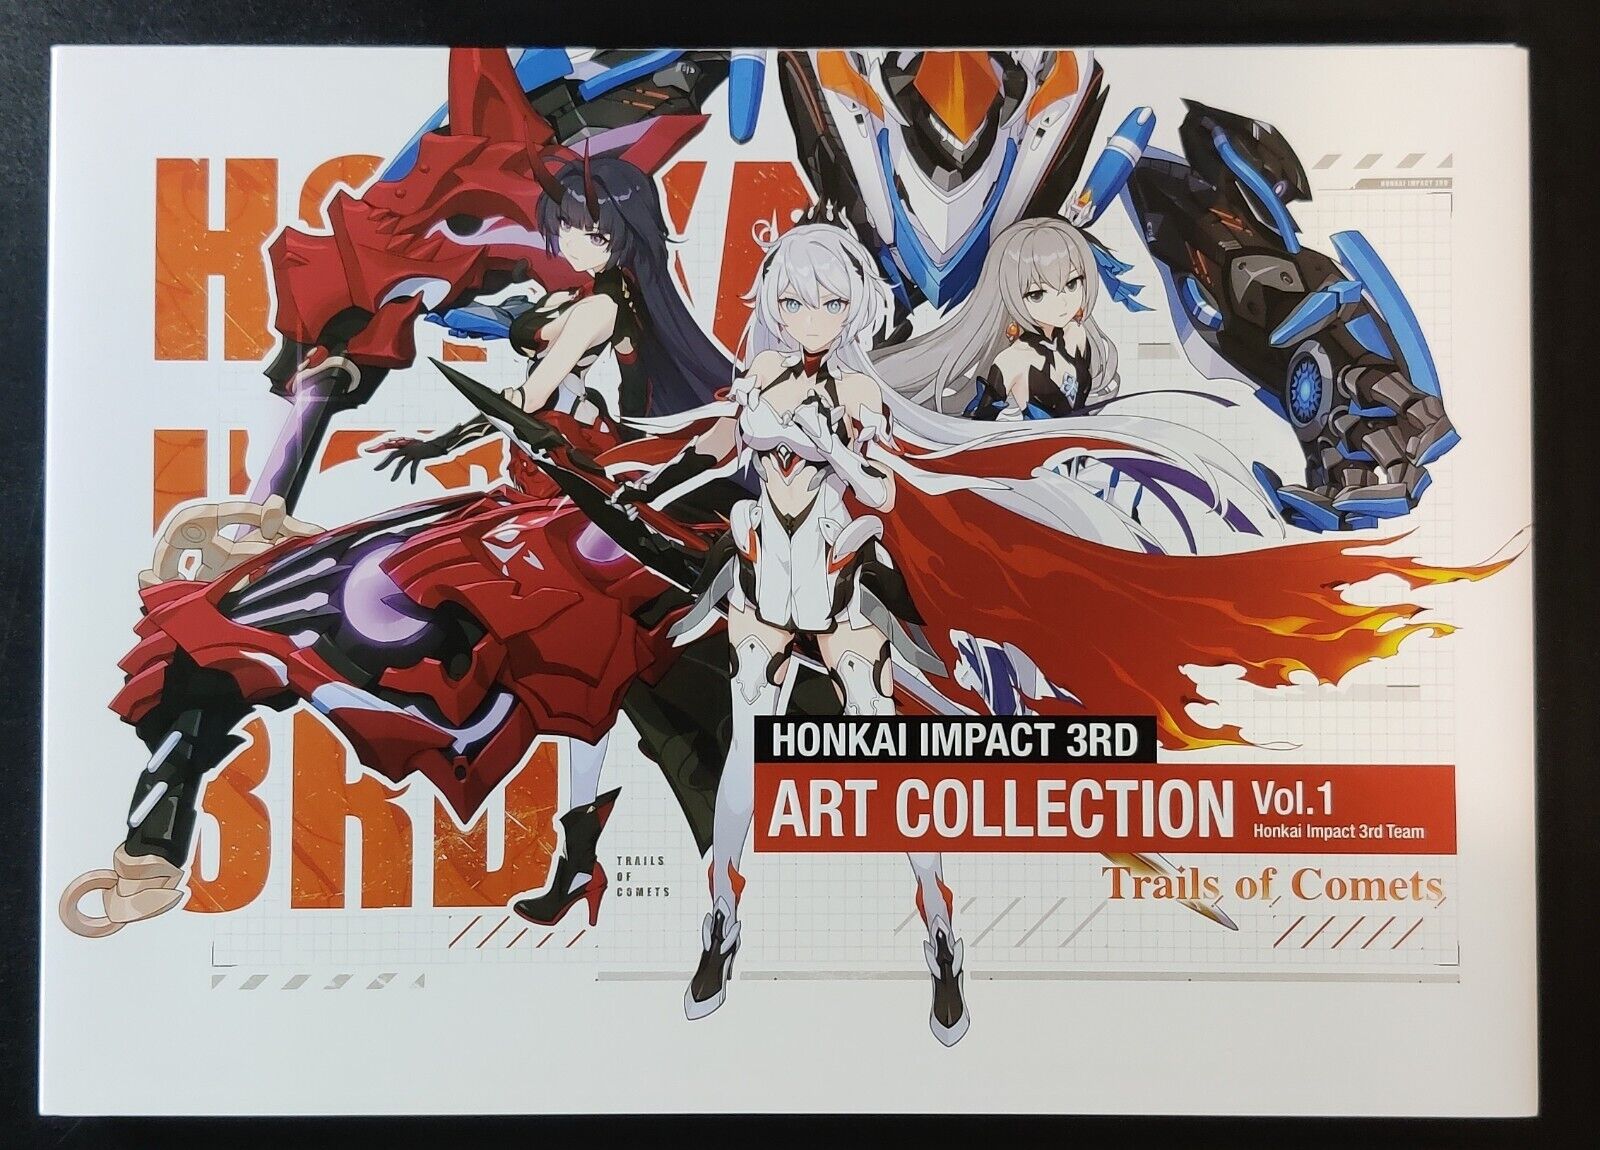 Honkai Impact 3rd Artbook Collection Vol.1 Trails of Comets - English